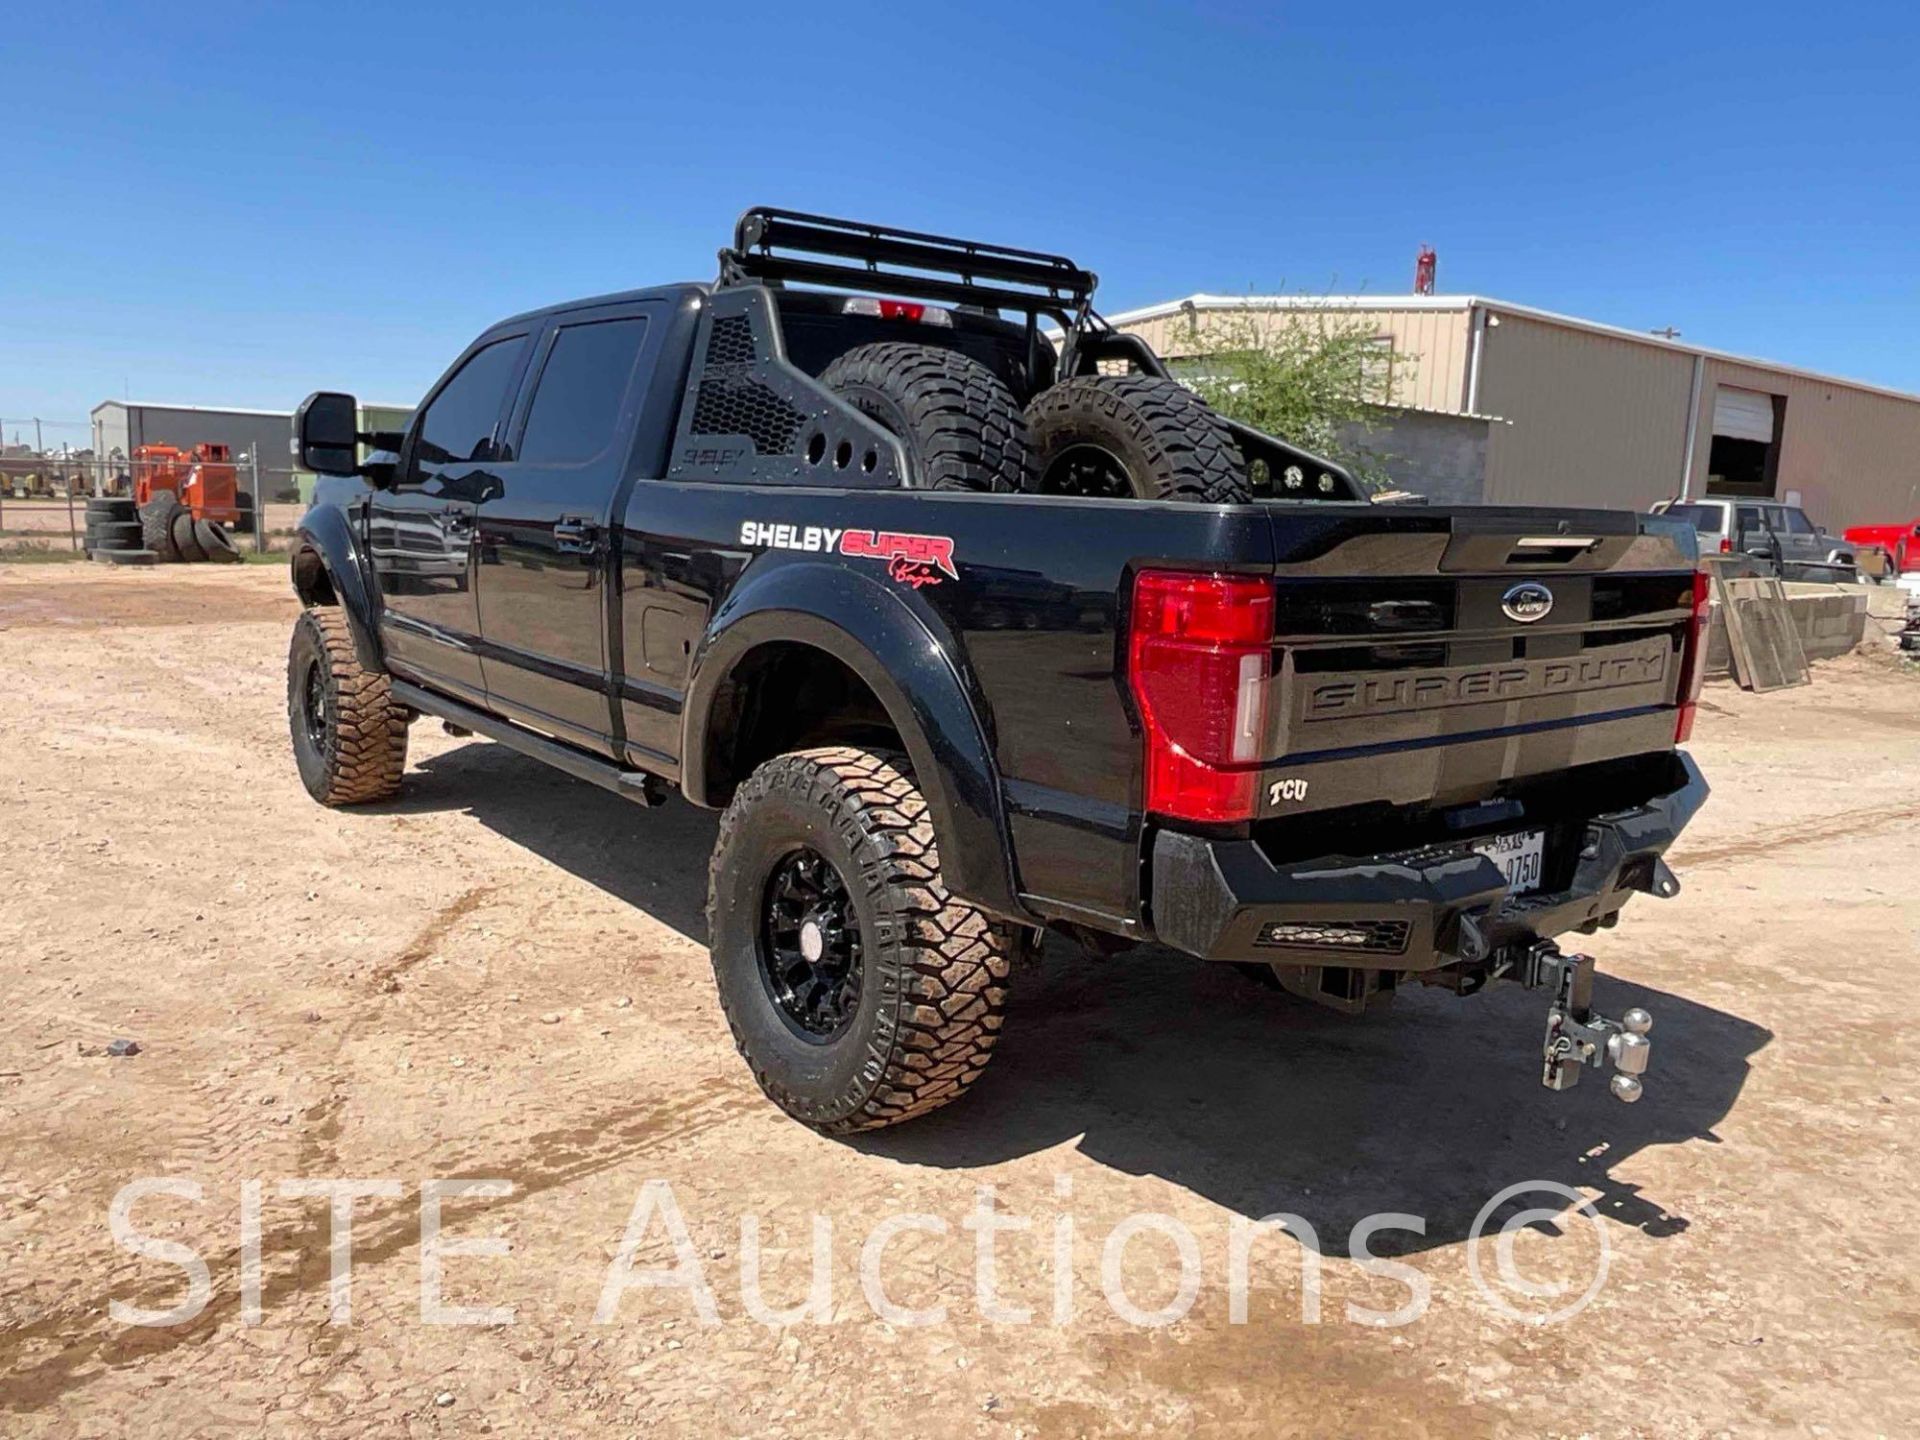 2021 Ford F250 SD Shelby Super Baja Crew Cab Pickup Truck - Image 2 of 10